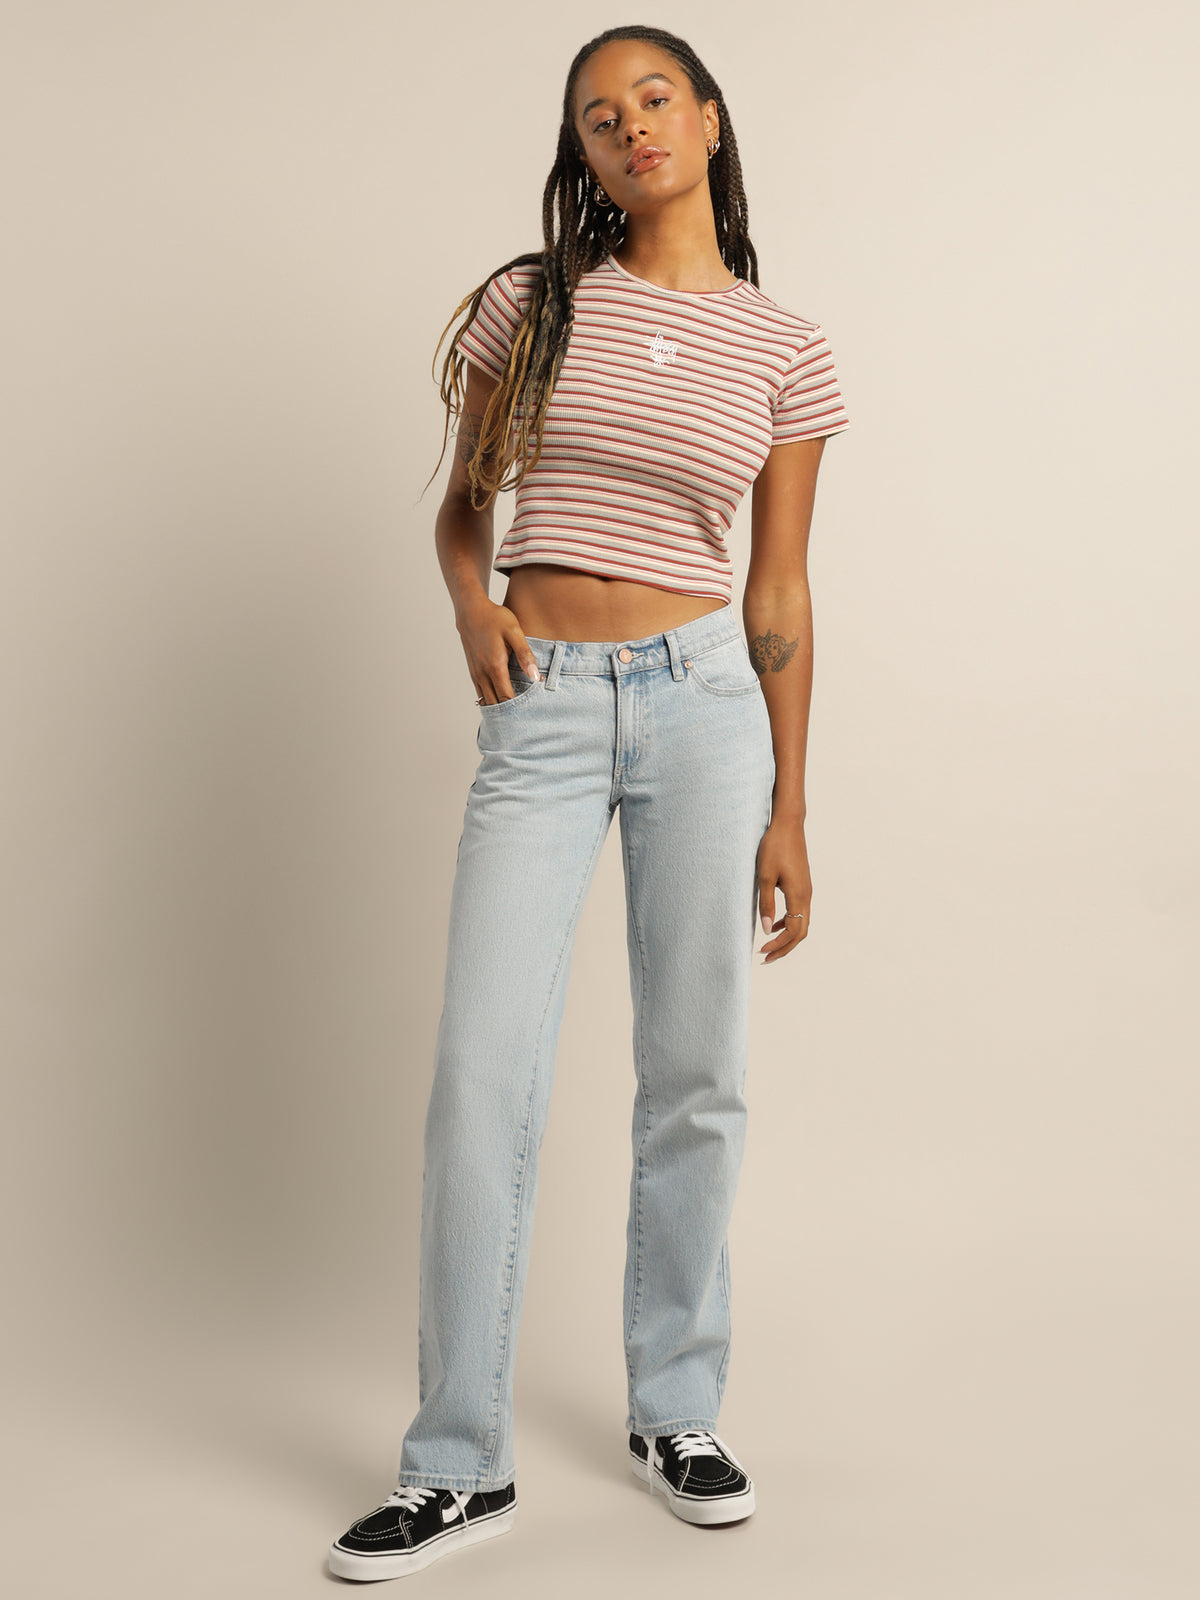 99 Low Straight Leg Jeans in Gina